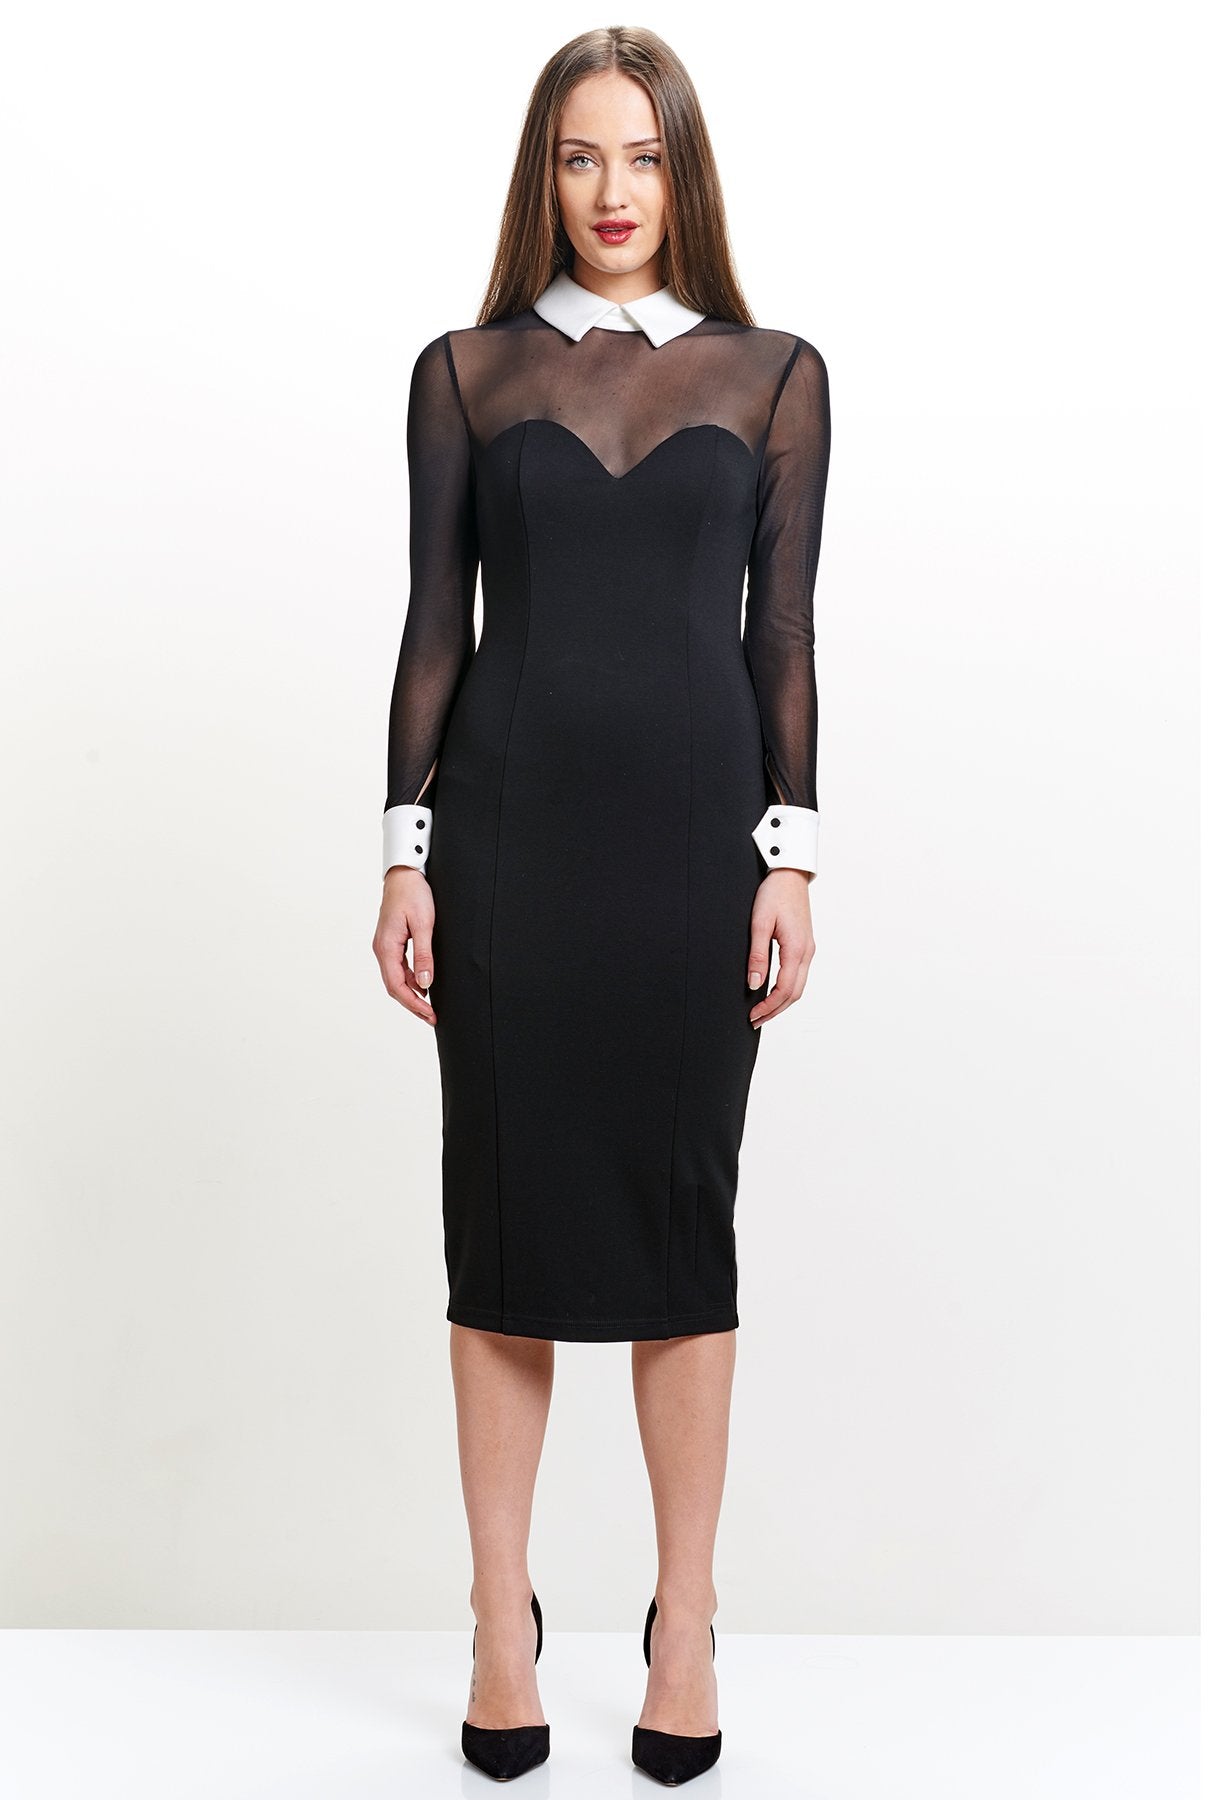 Front view of model wearing black knit Ponte midi tuxedo dress, with contrast mesh long sleeves & white collar and cuffs.